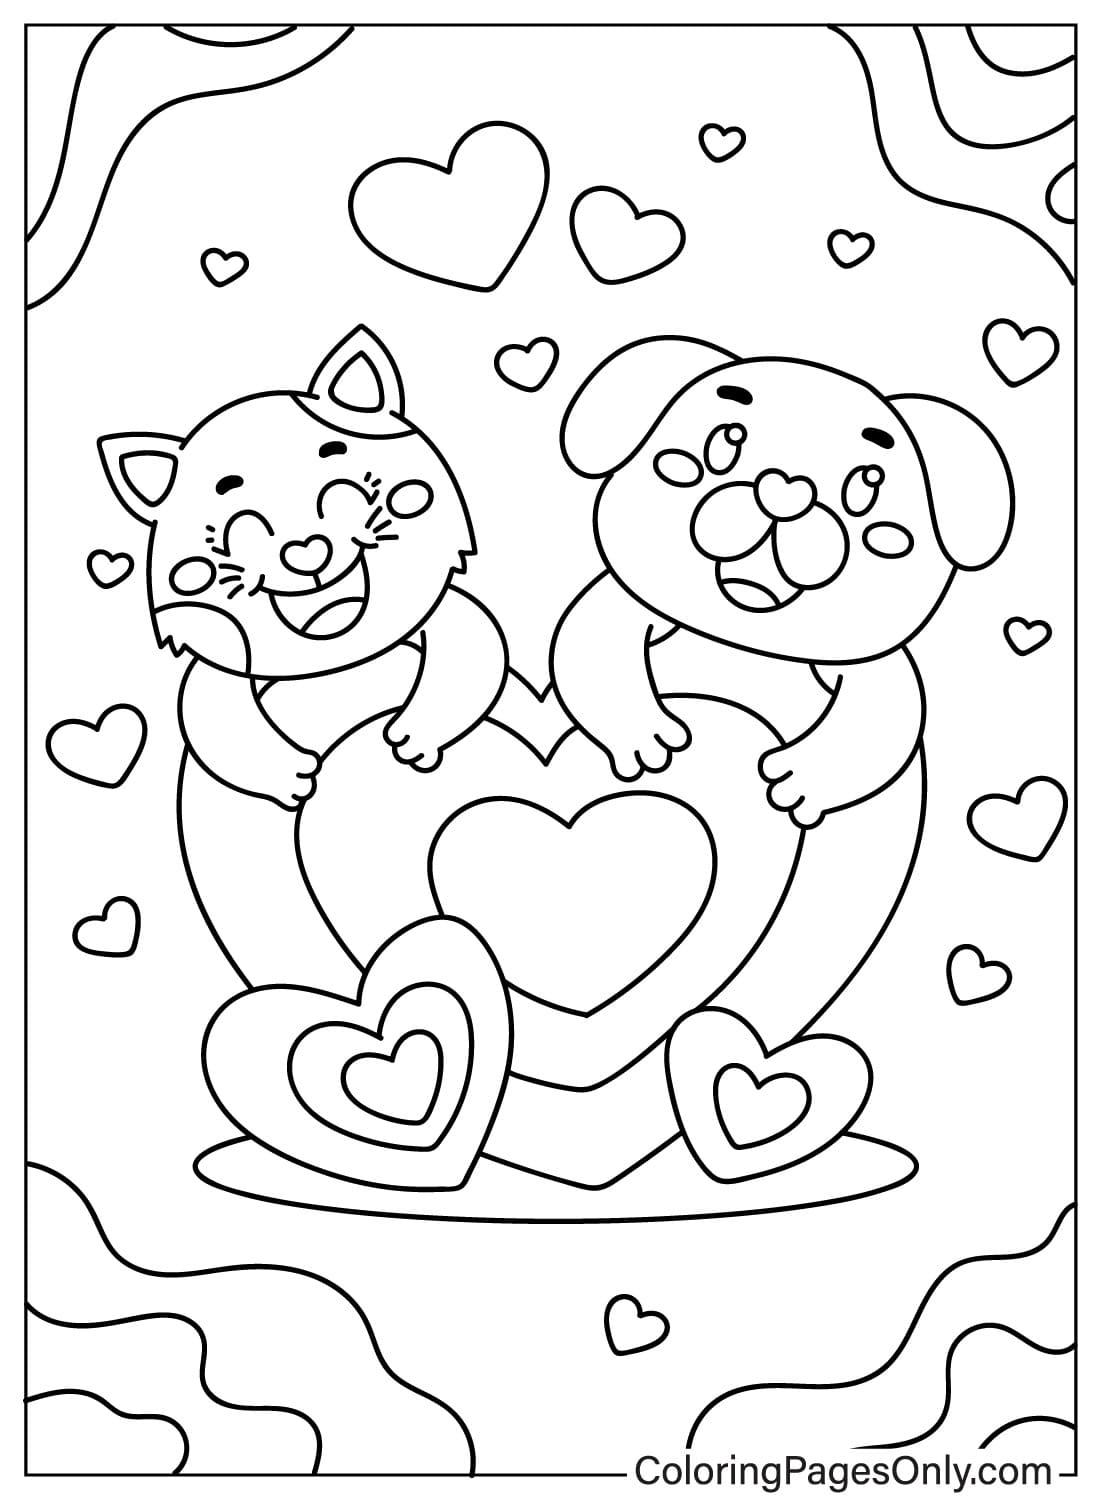 Heart Images Coloring Page from Heart